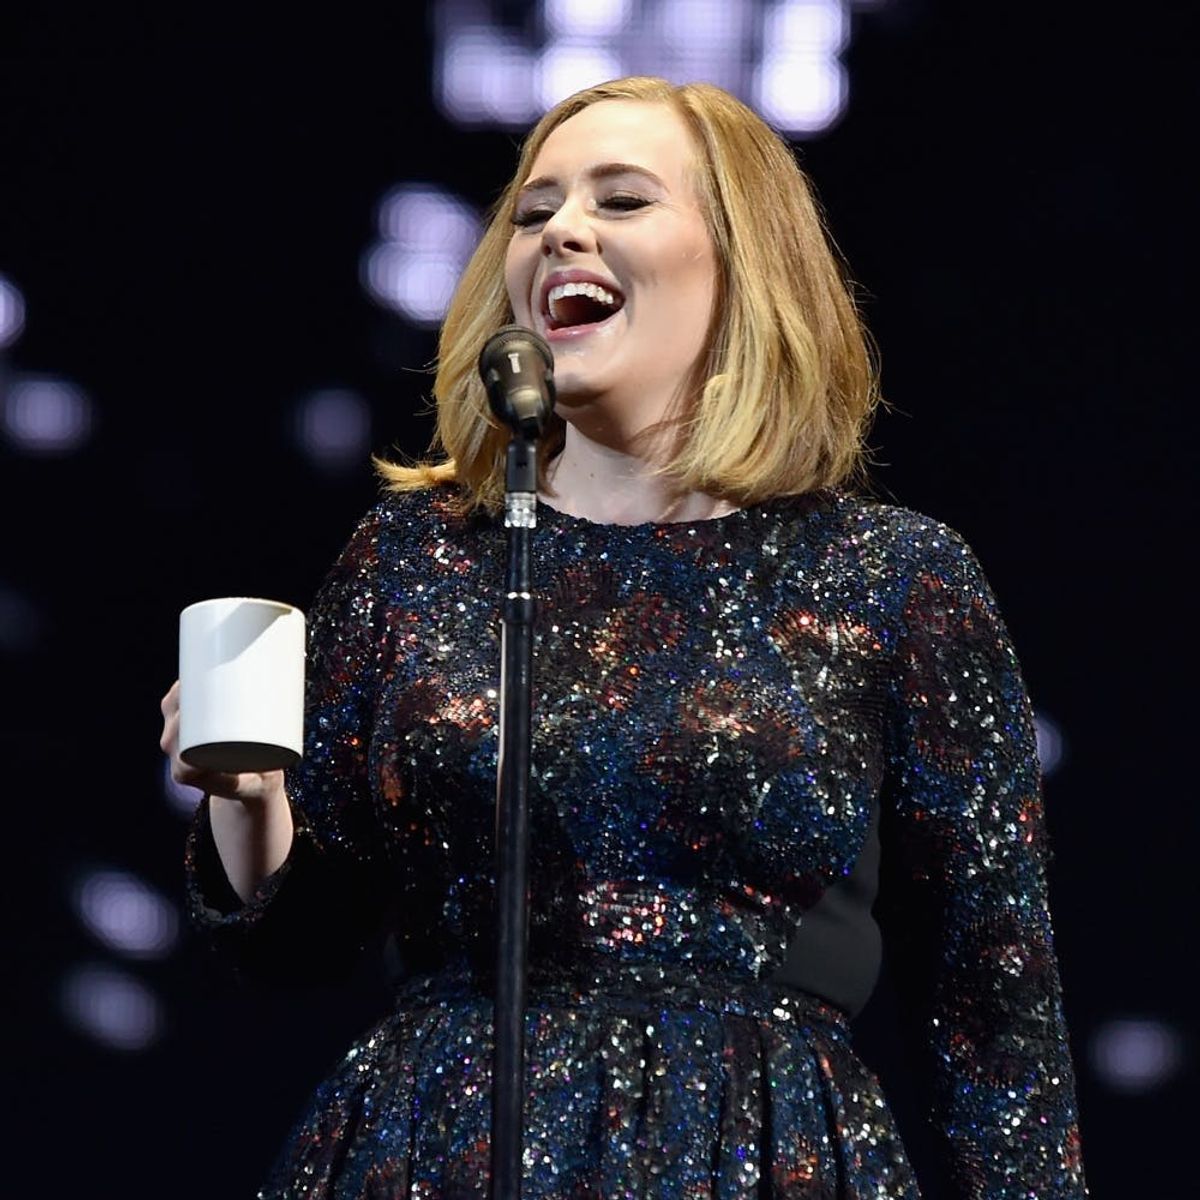 Adele Has a Secret Twitter Account for the Most Hilarious (and Relatable) Reason